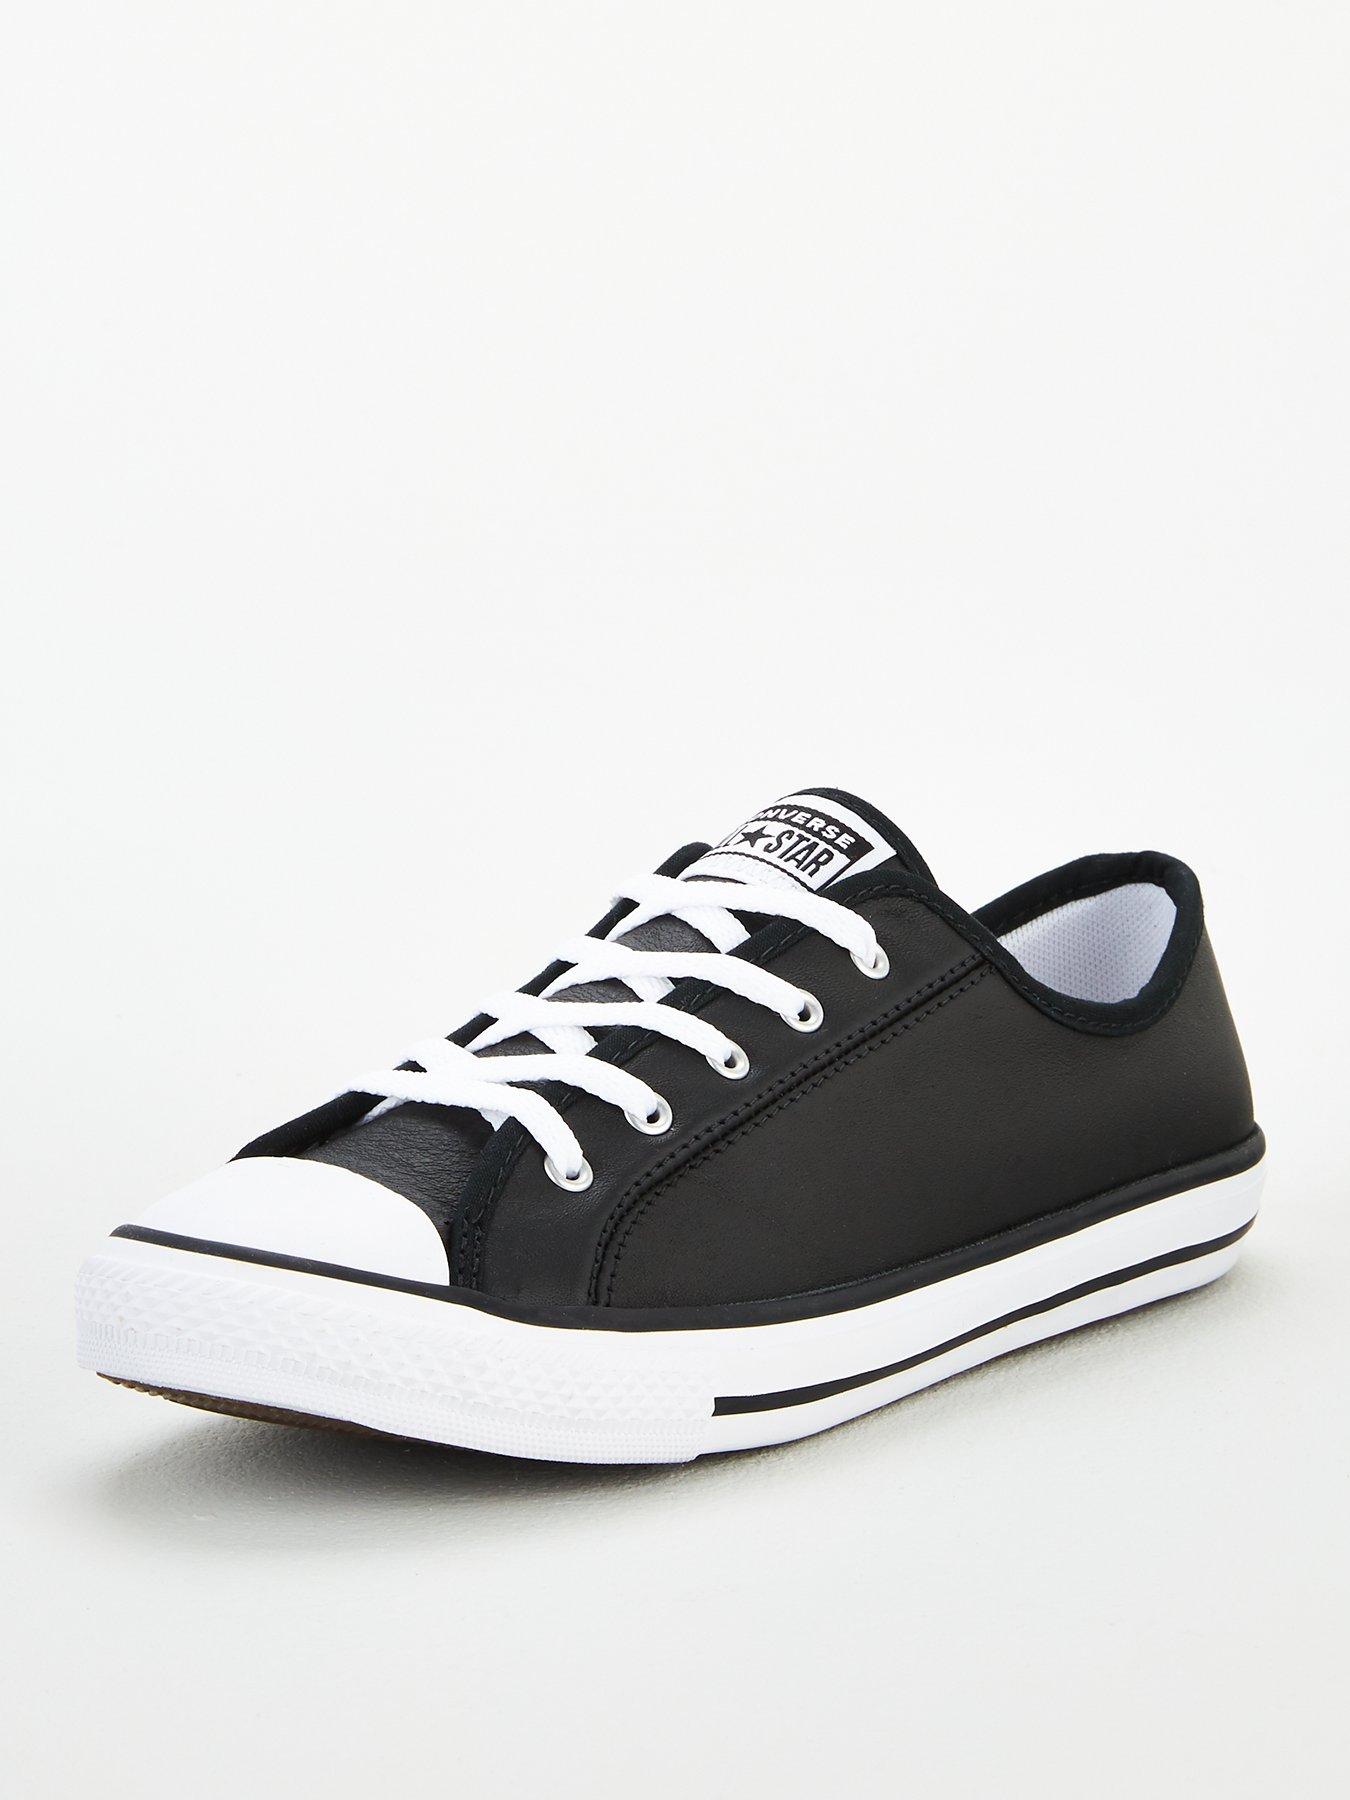 converse dainty leather 5.5